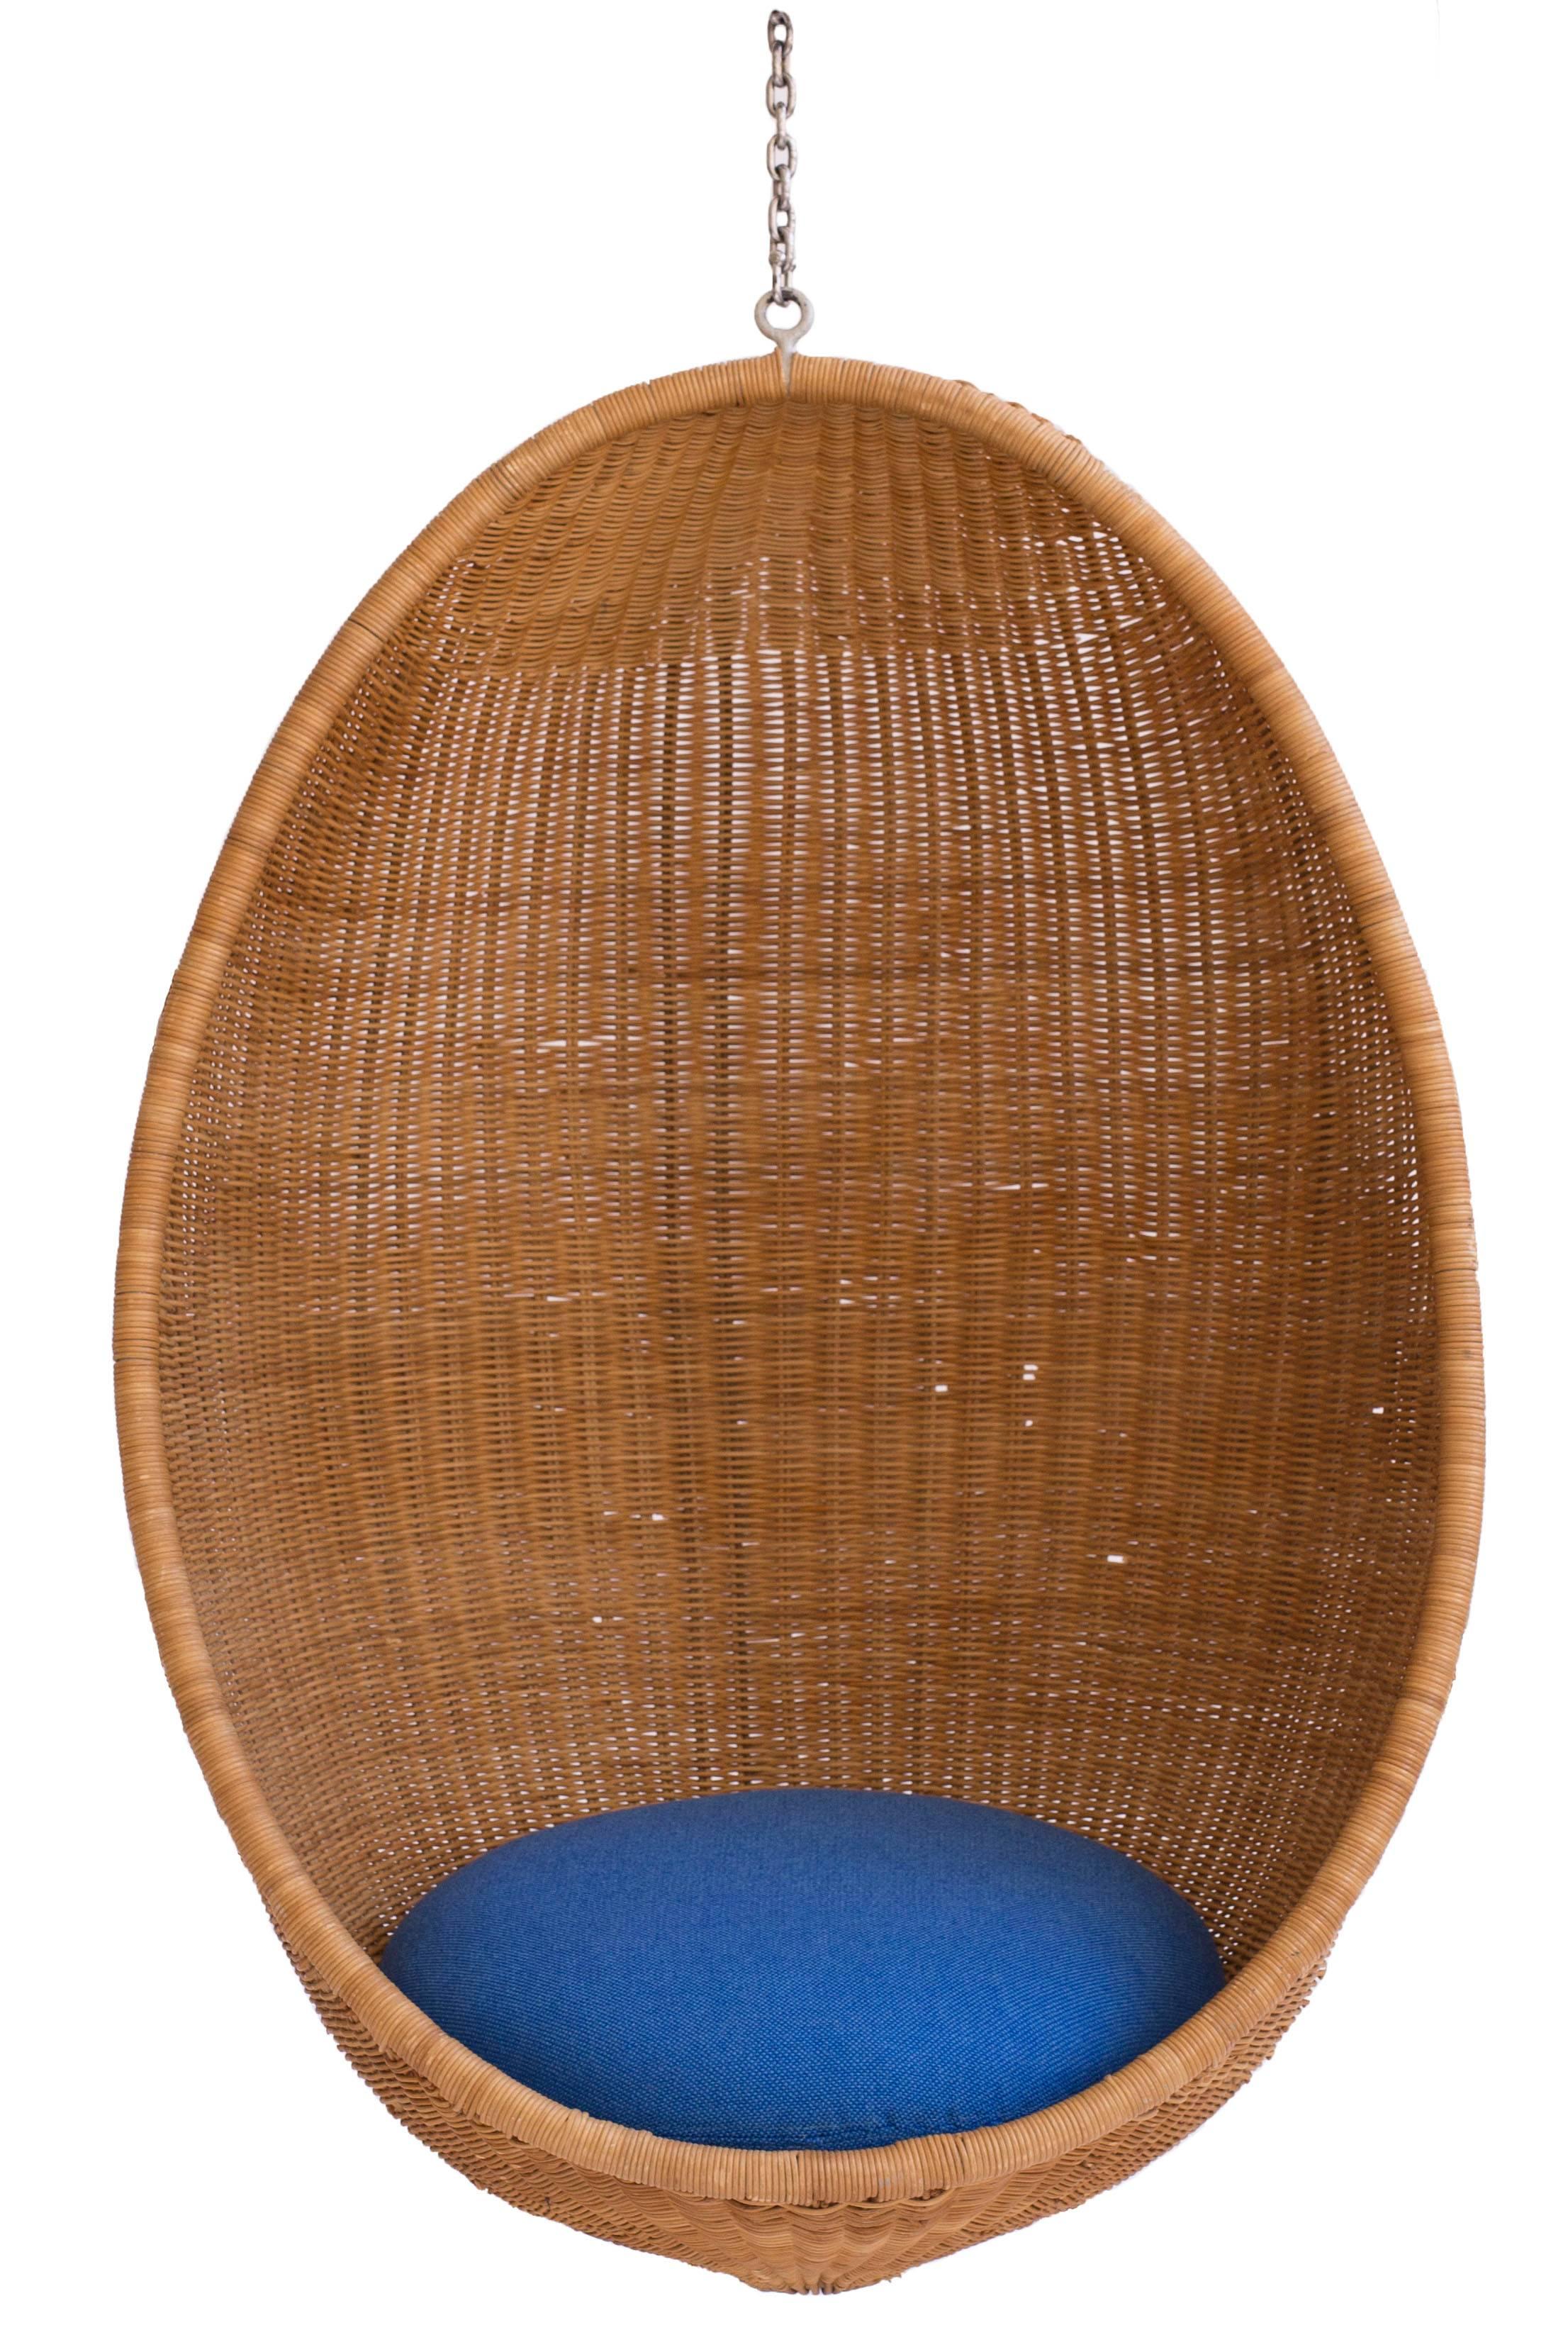 Rare Nanna Ditzel ‘Hanging Egg’ chair of woven cane, metal chain and seat cushion in blue fabric. 

Designed by Nanna Ditzel 1959 and made at R. Wengler, Denmark. 

Good original condition and beautiful patina.